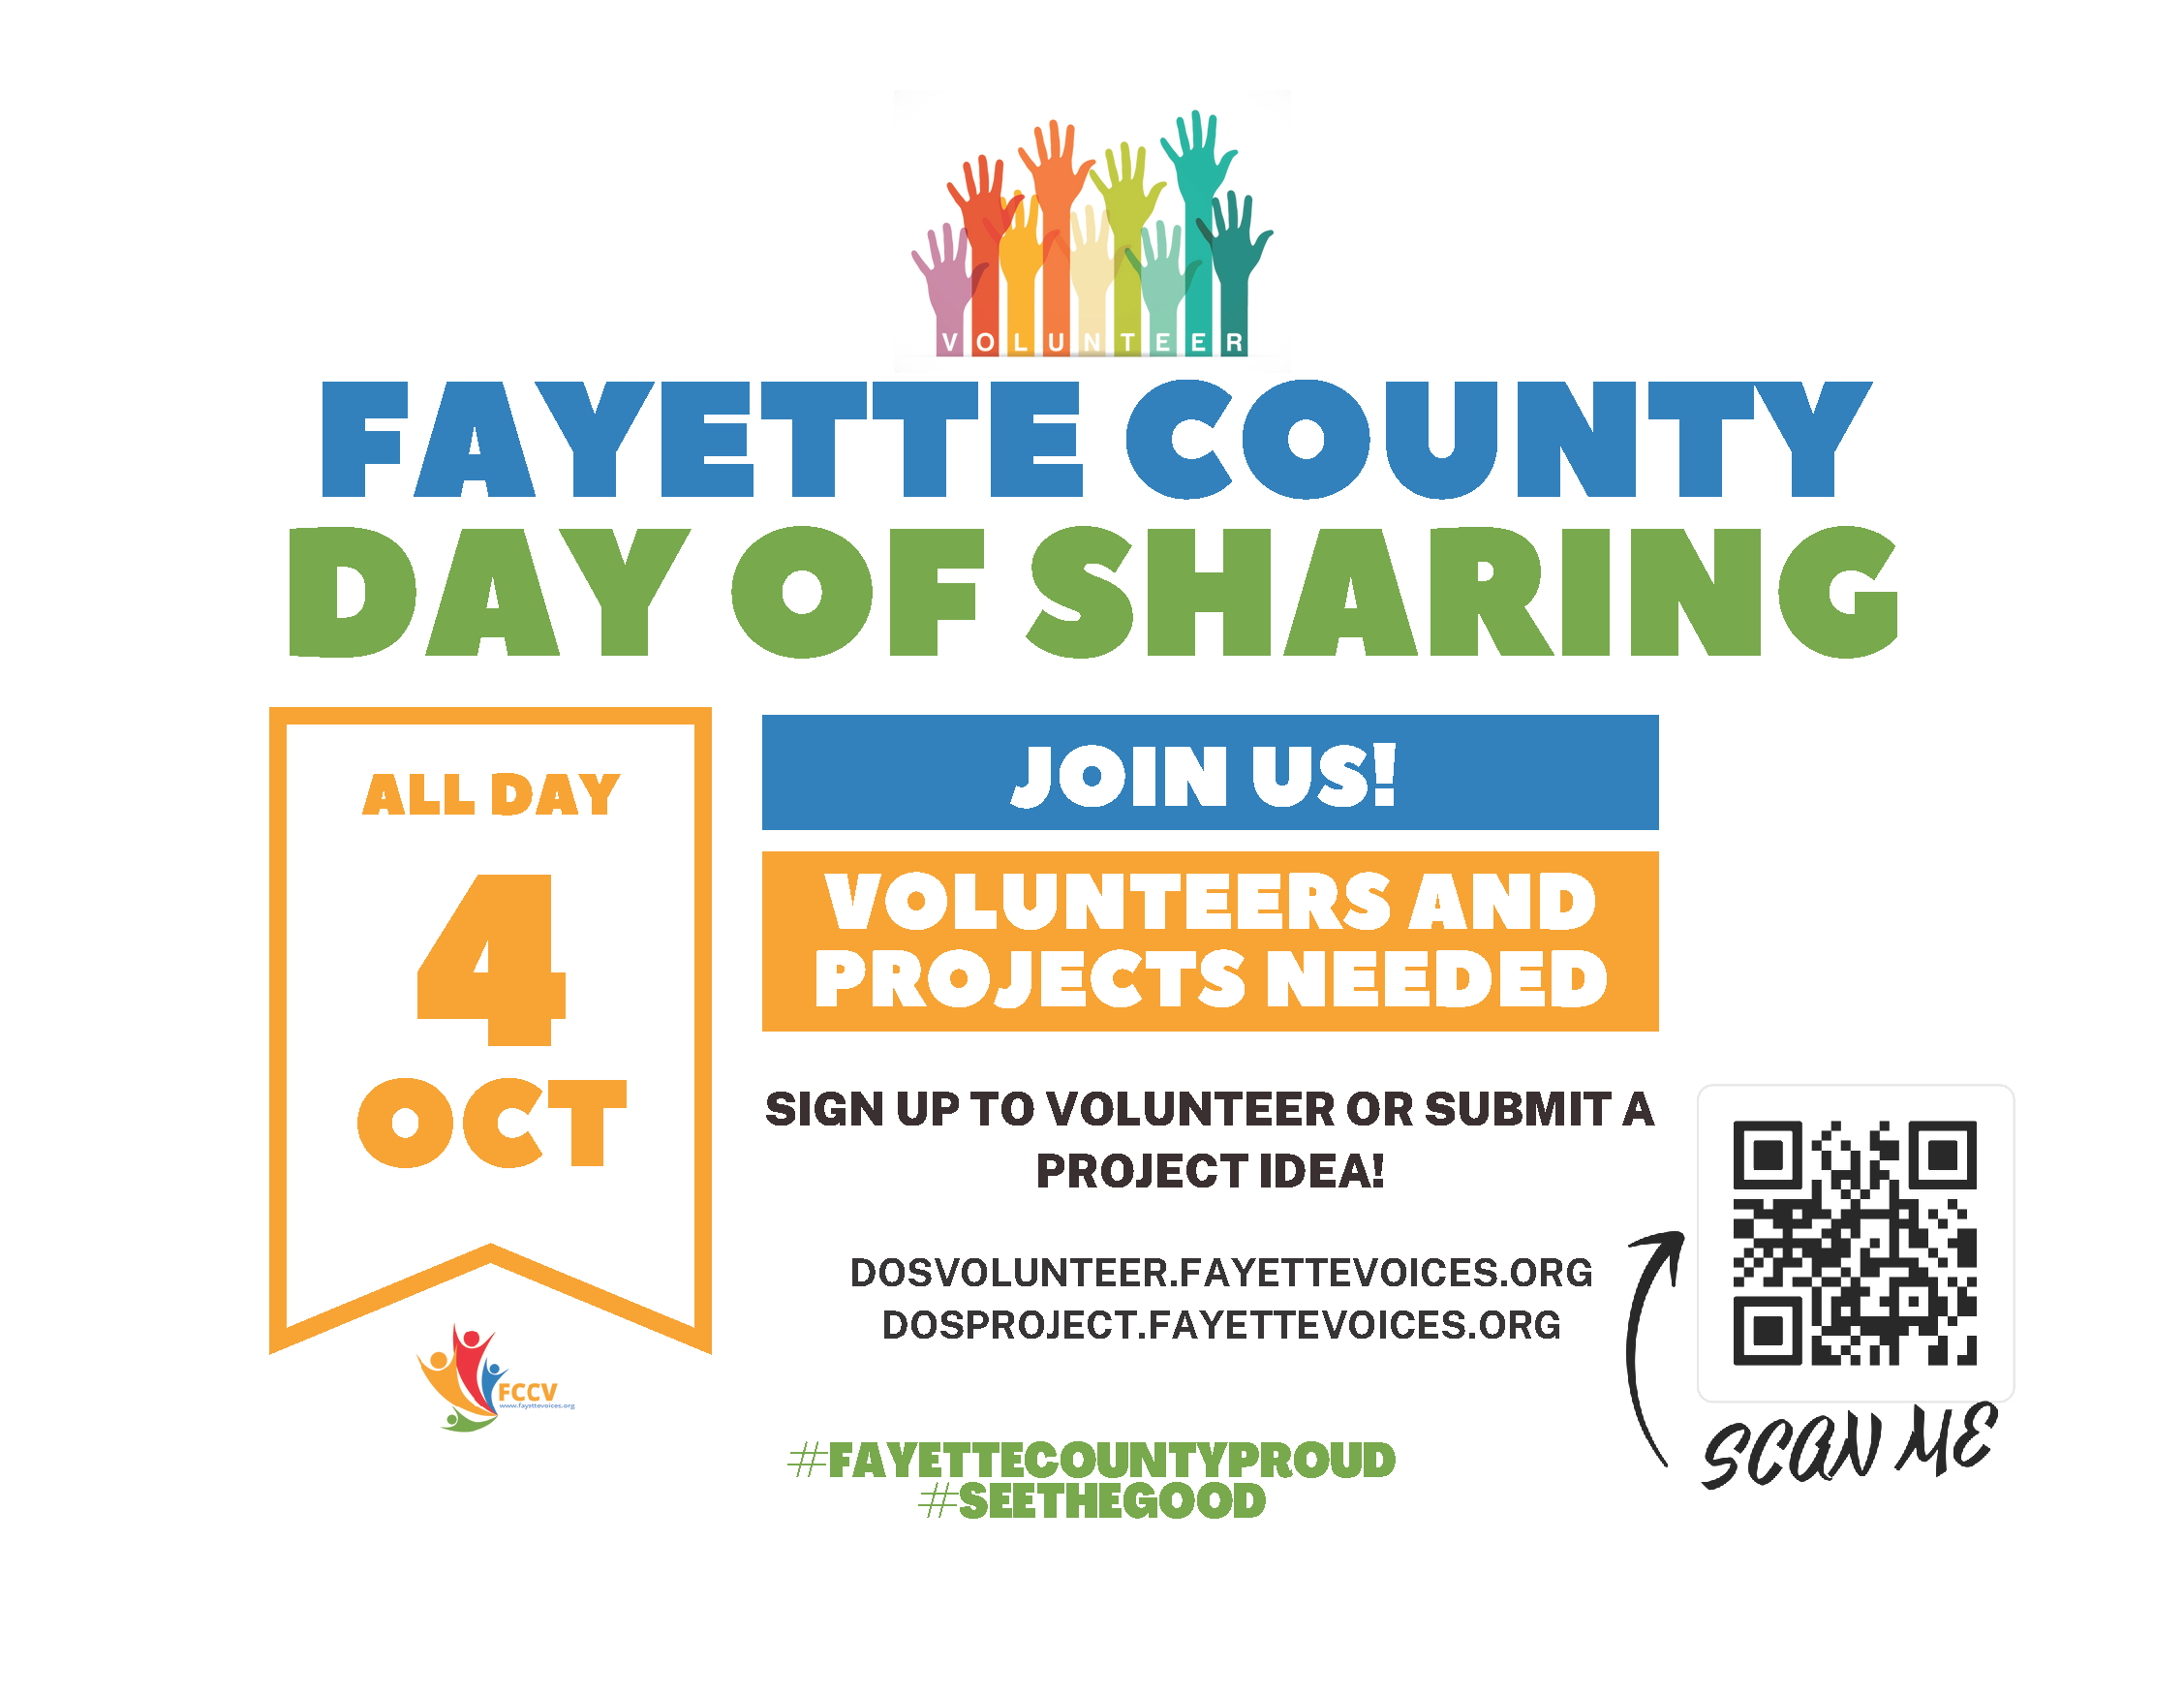 Fayette Day of Sharing Date